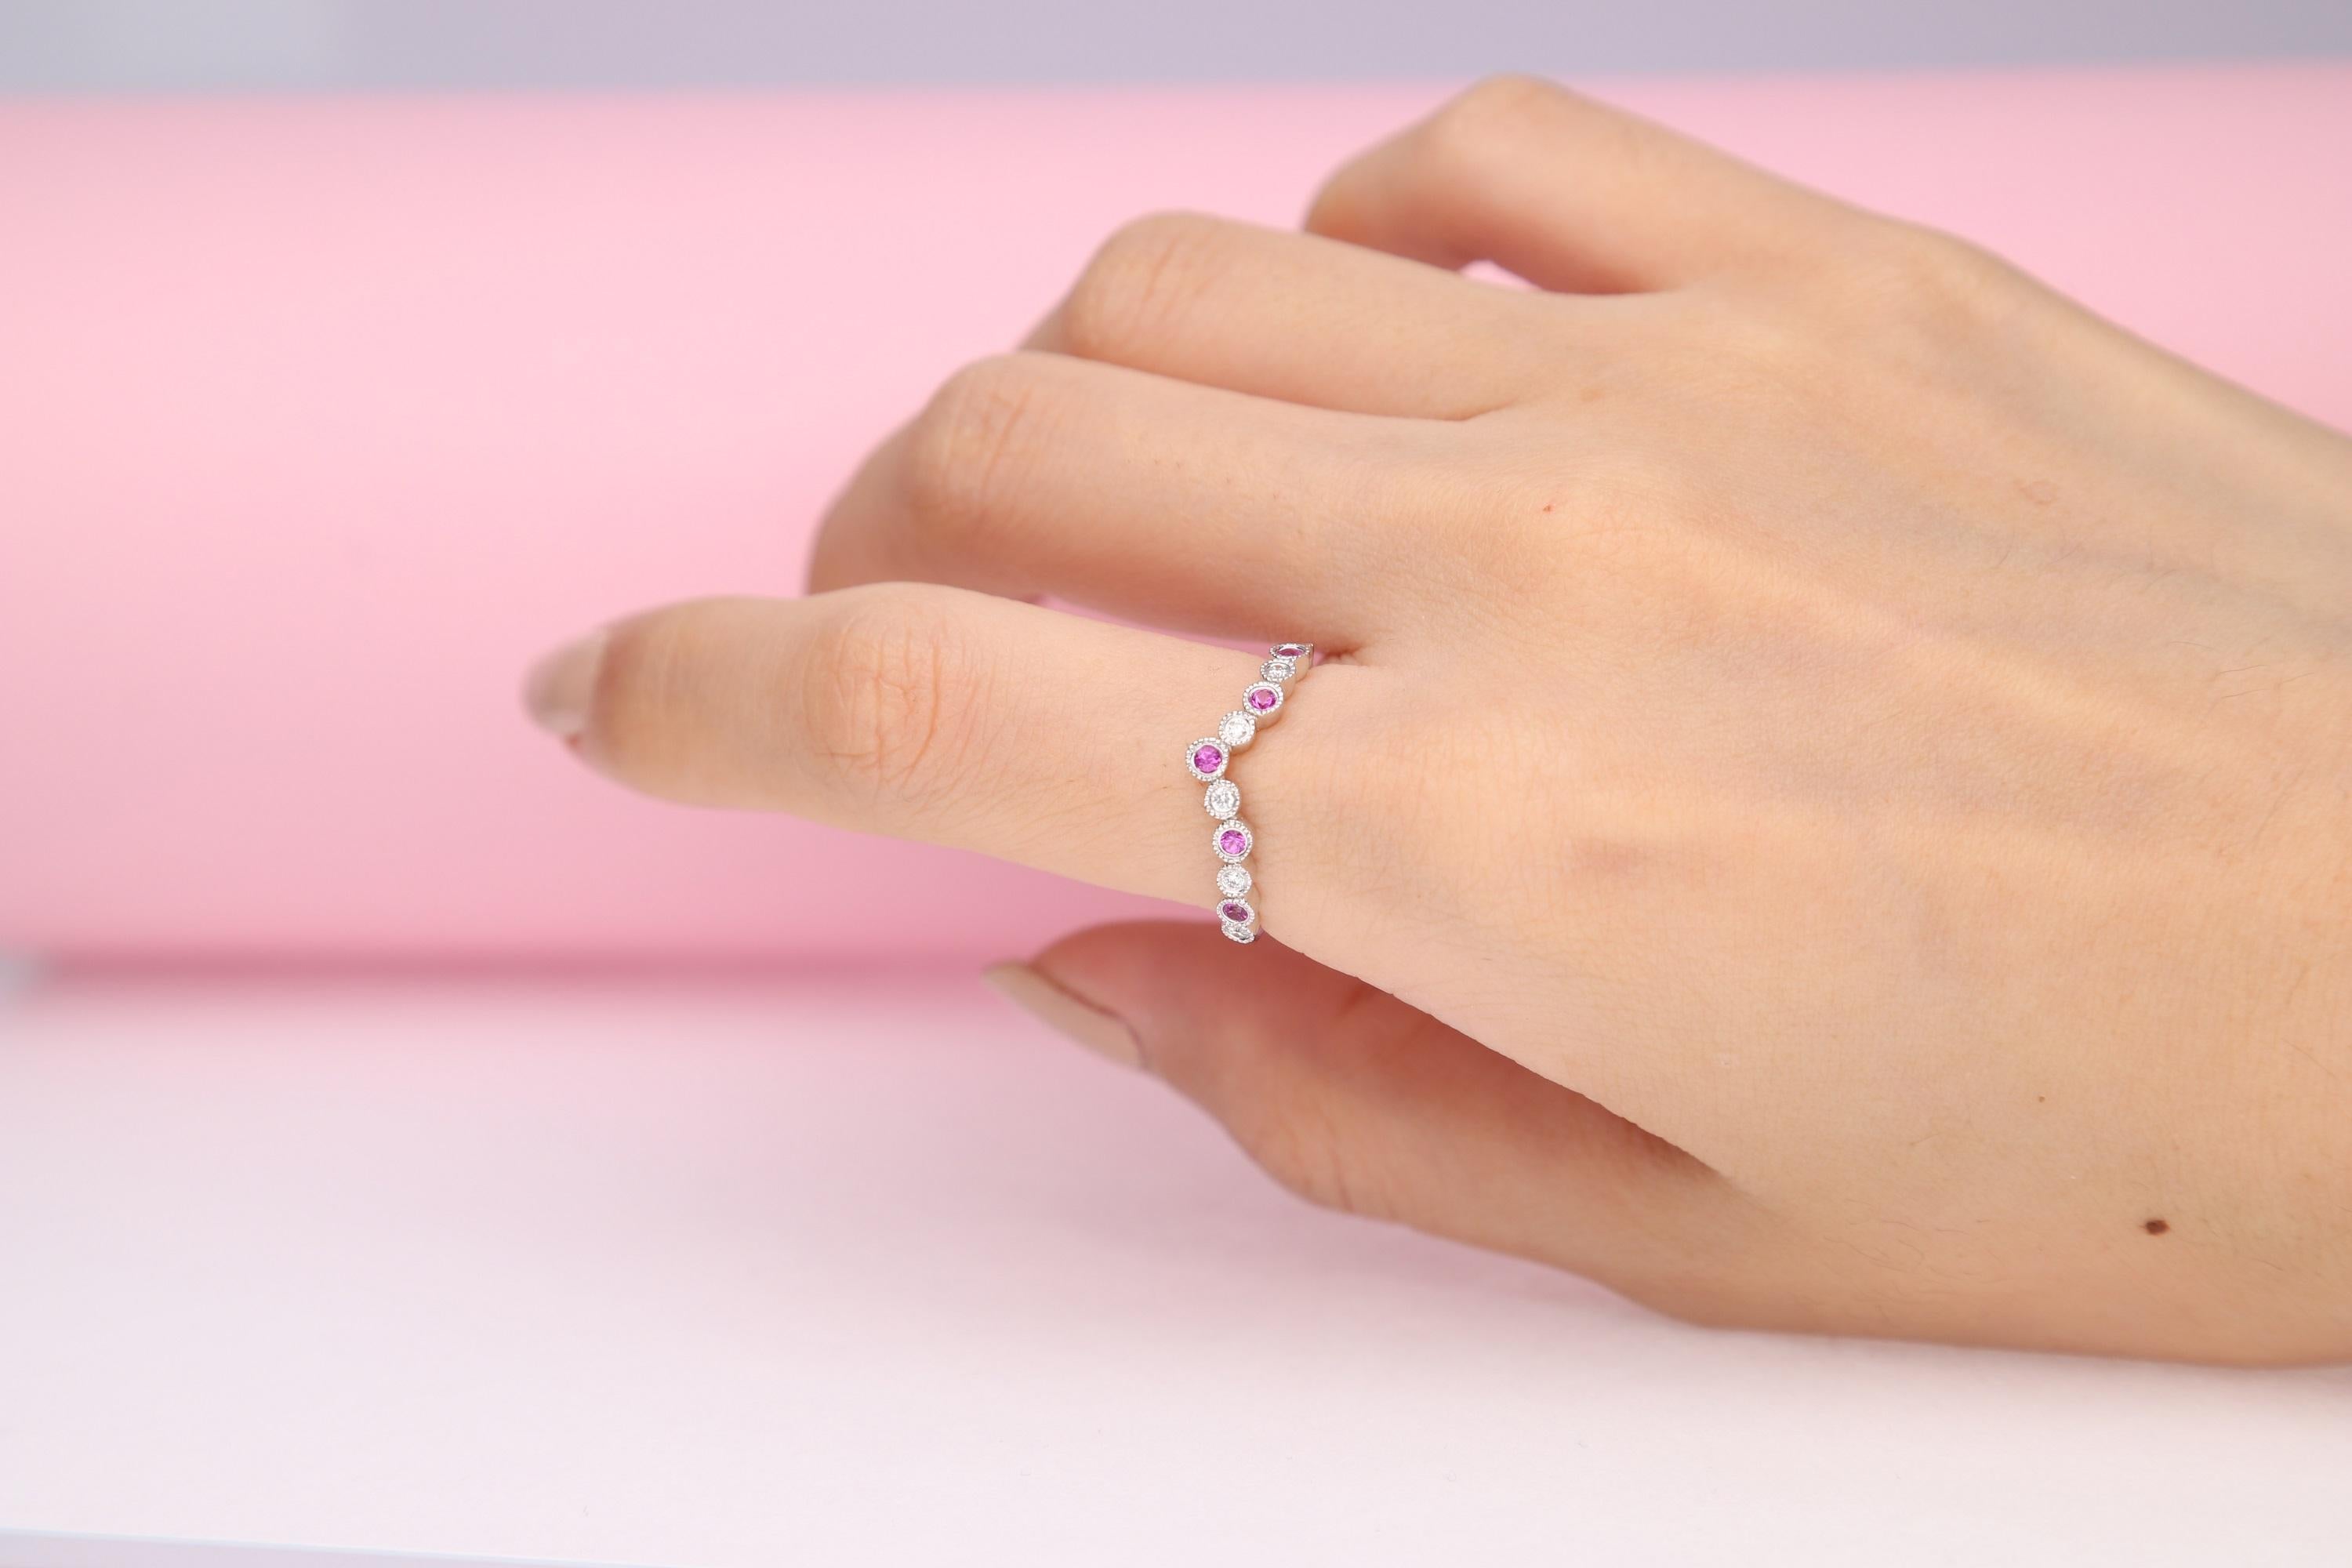 Stunning, timeless and classy eternity Unique Ring. Decorate yourself in luxury with this Gin & Grace Ring. The 14K White Gold jewelry boasts with Oval-cut 5 pcs 0.19 carat Hot Pink Ruby and Natural Round-cut white Diamond (6 Pcs) 0.09 Carat accent